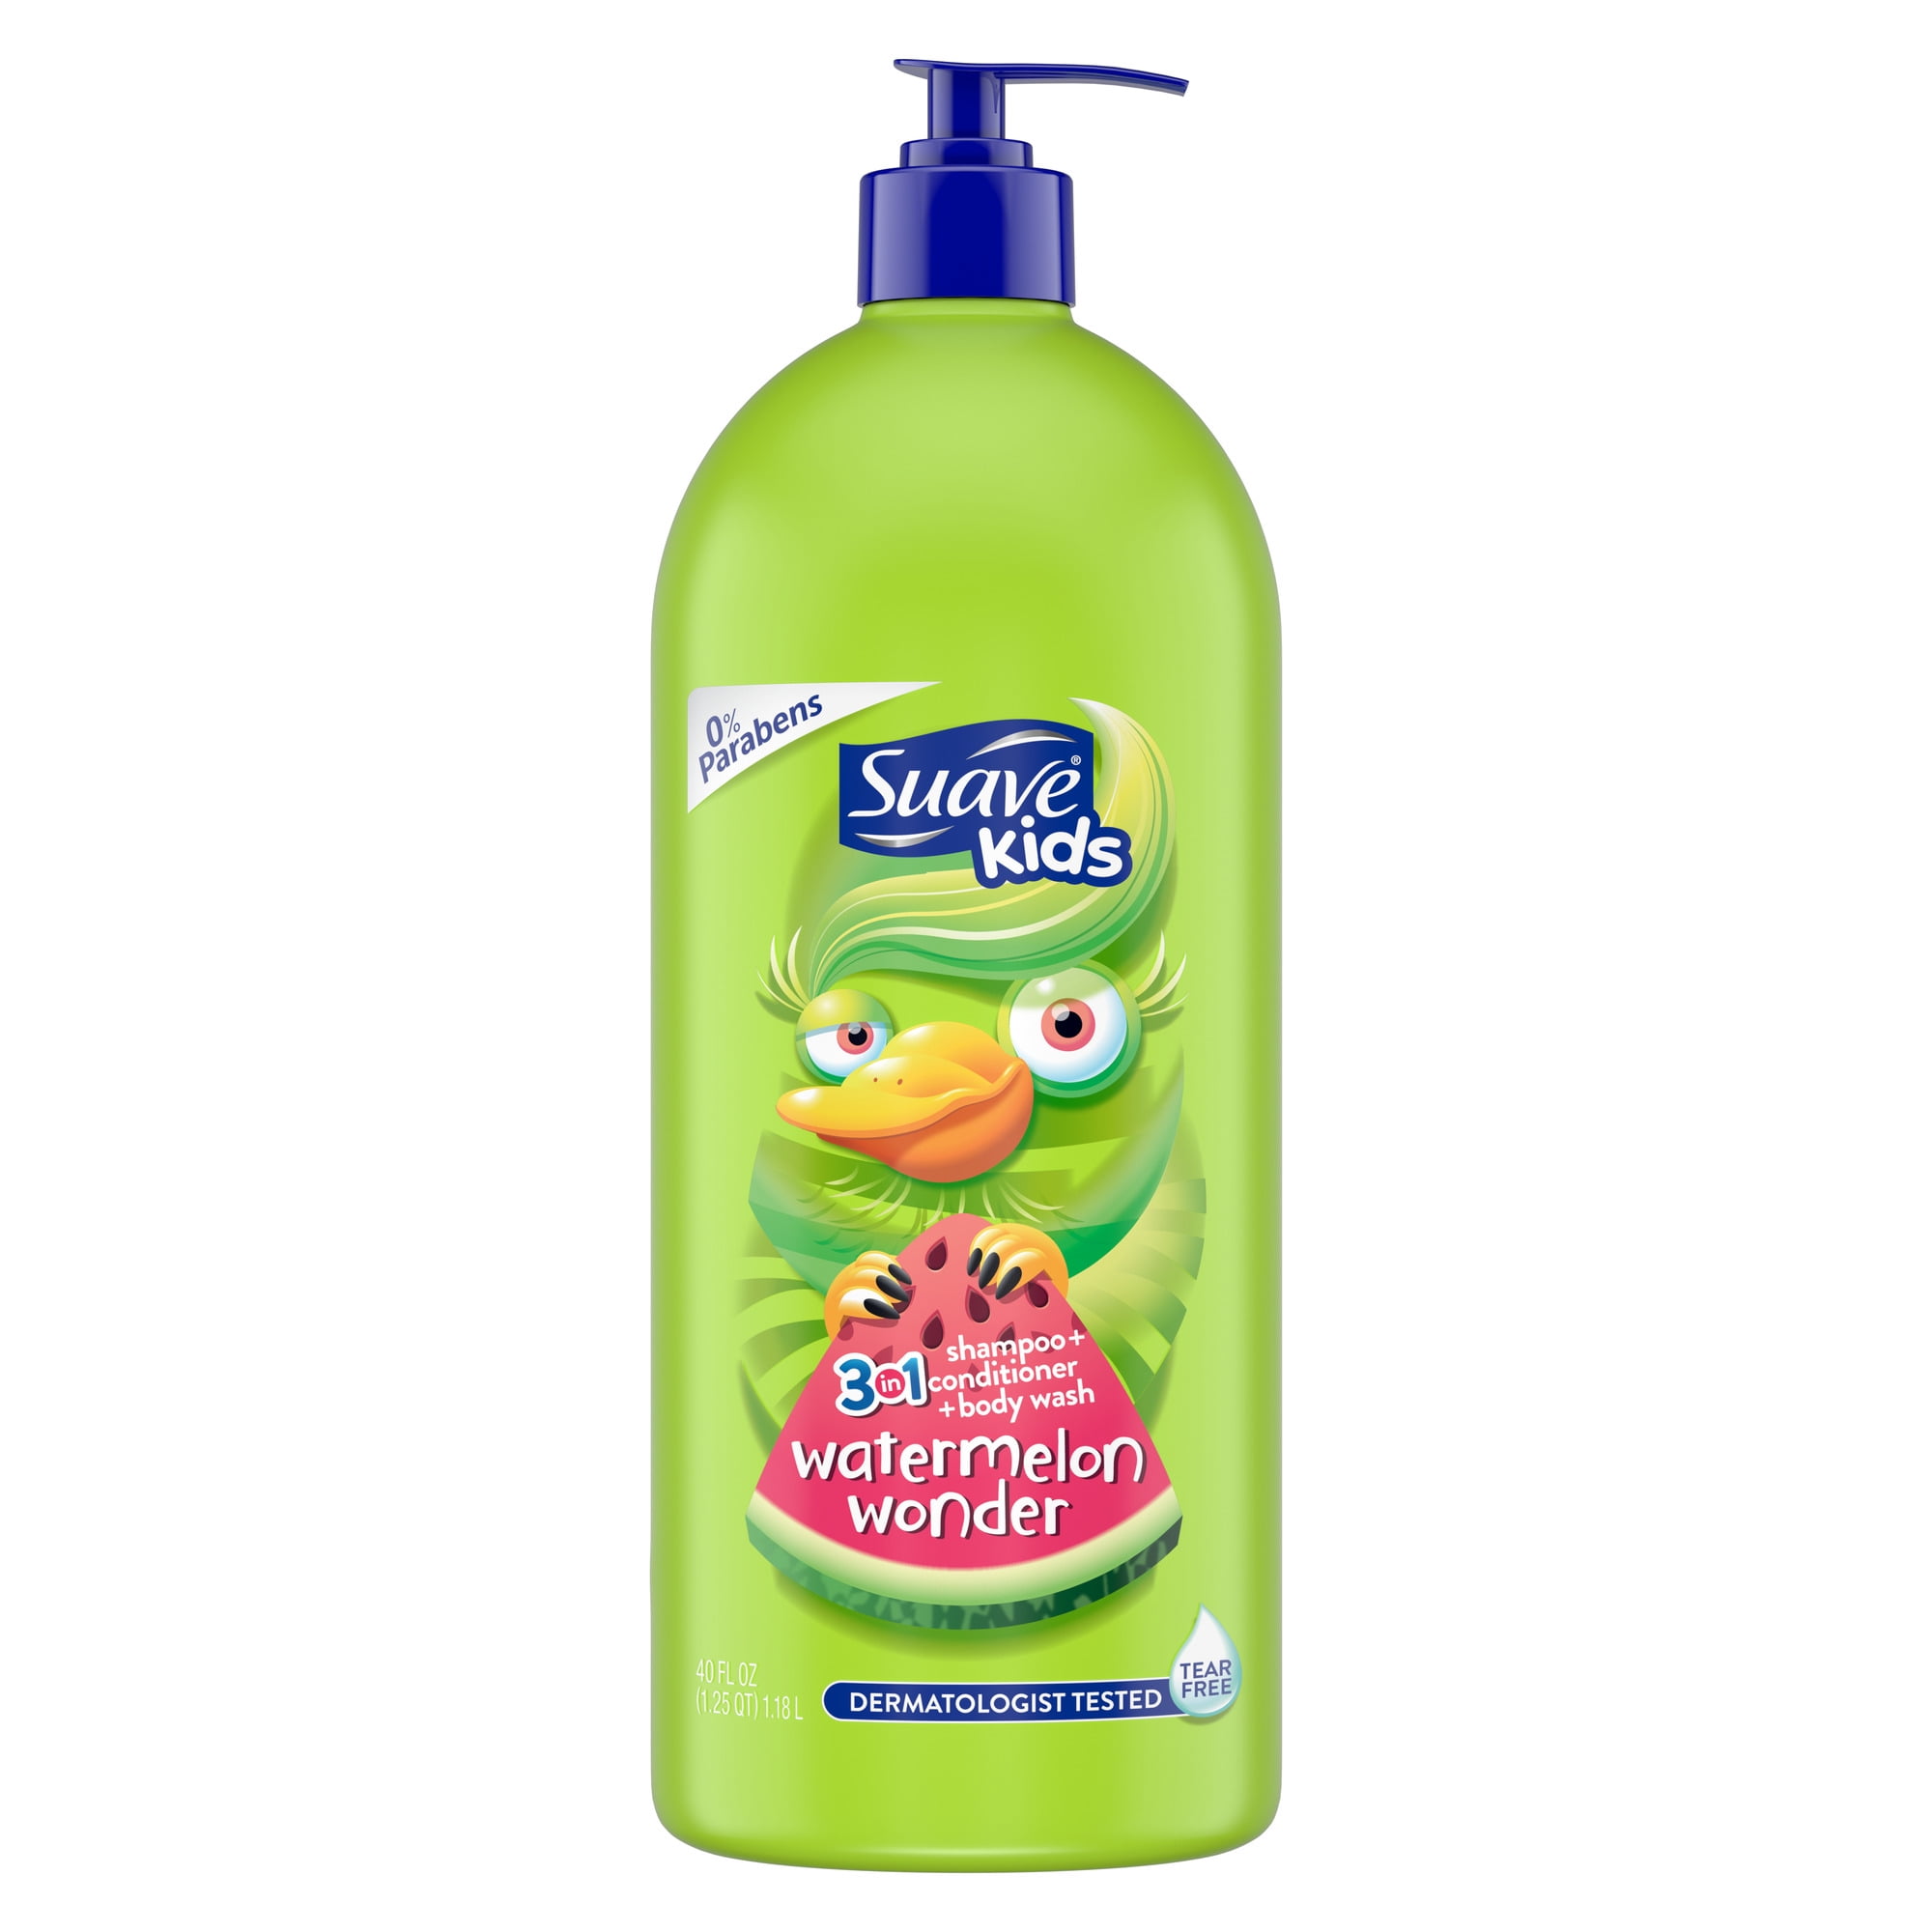 Suave 3-in-1 Shampoo, Conditioner, Bodywash, Watermelon Wonder Detangling and Cleansing, Hypoallergenic for All Hair Types, 40 oz